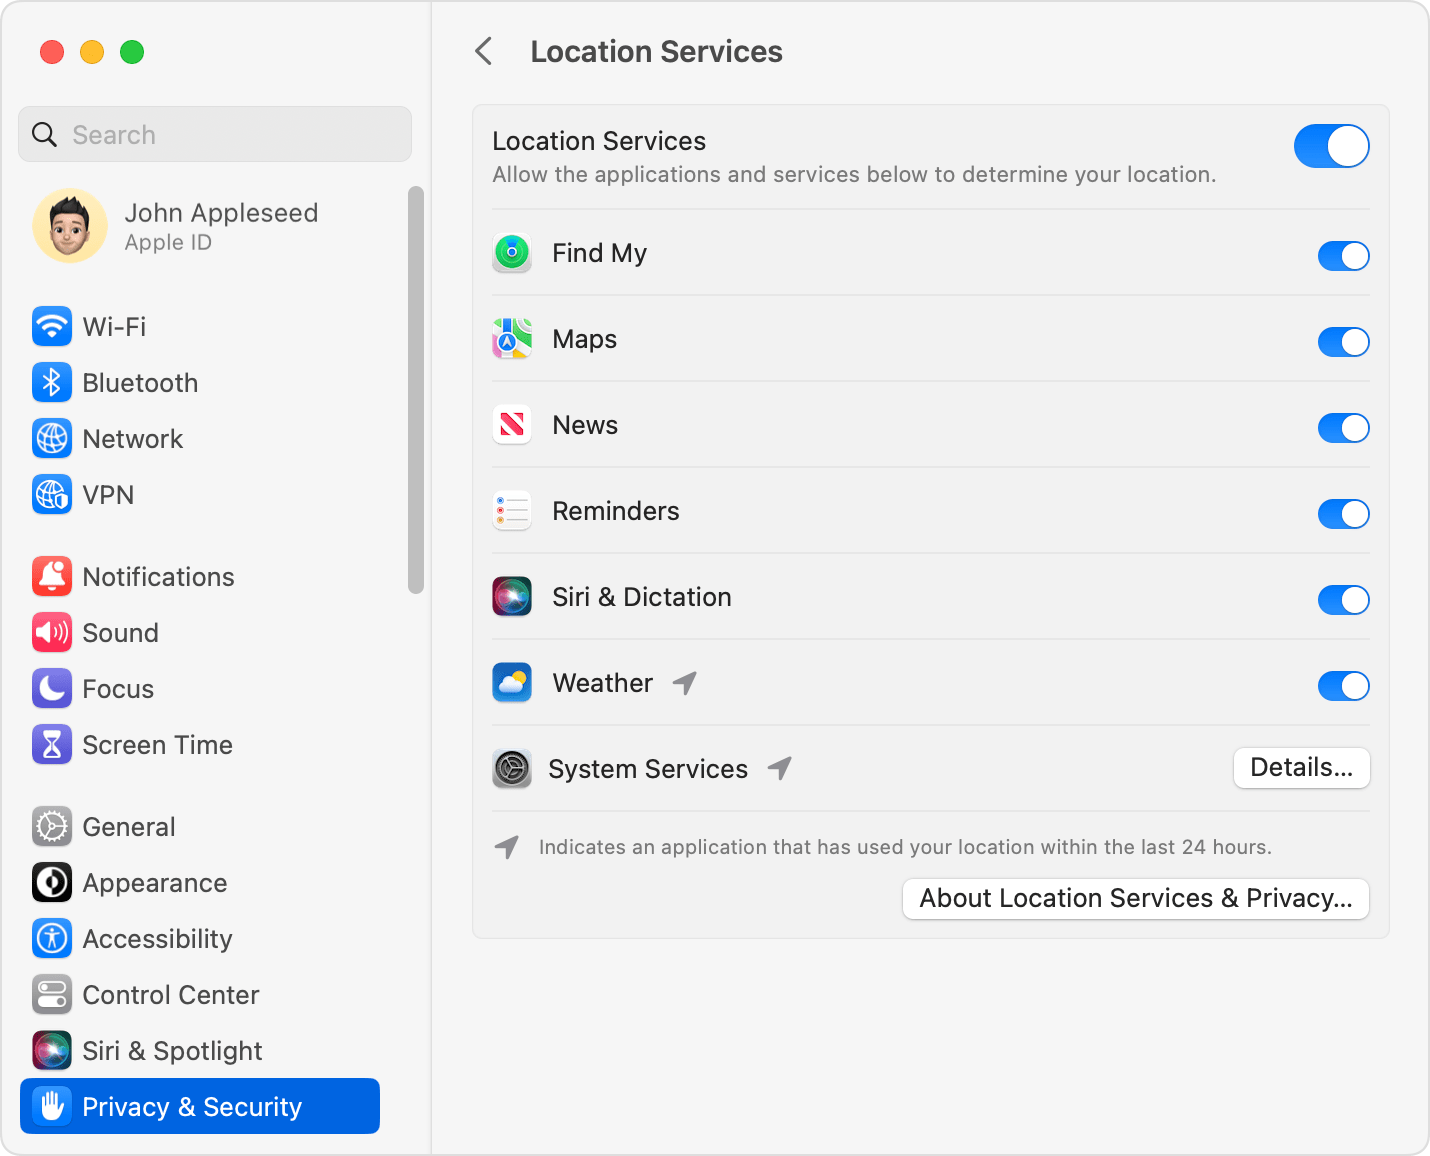 The Location Services options within the macOS Privacy & Security settings, with “Location Services” and “Maps” selected.